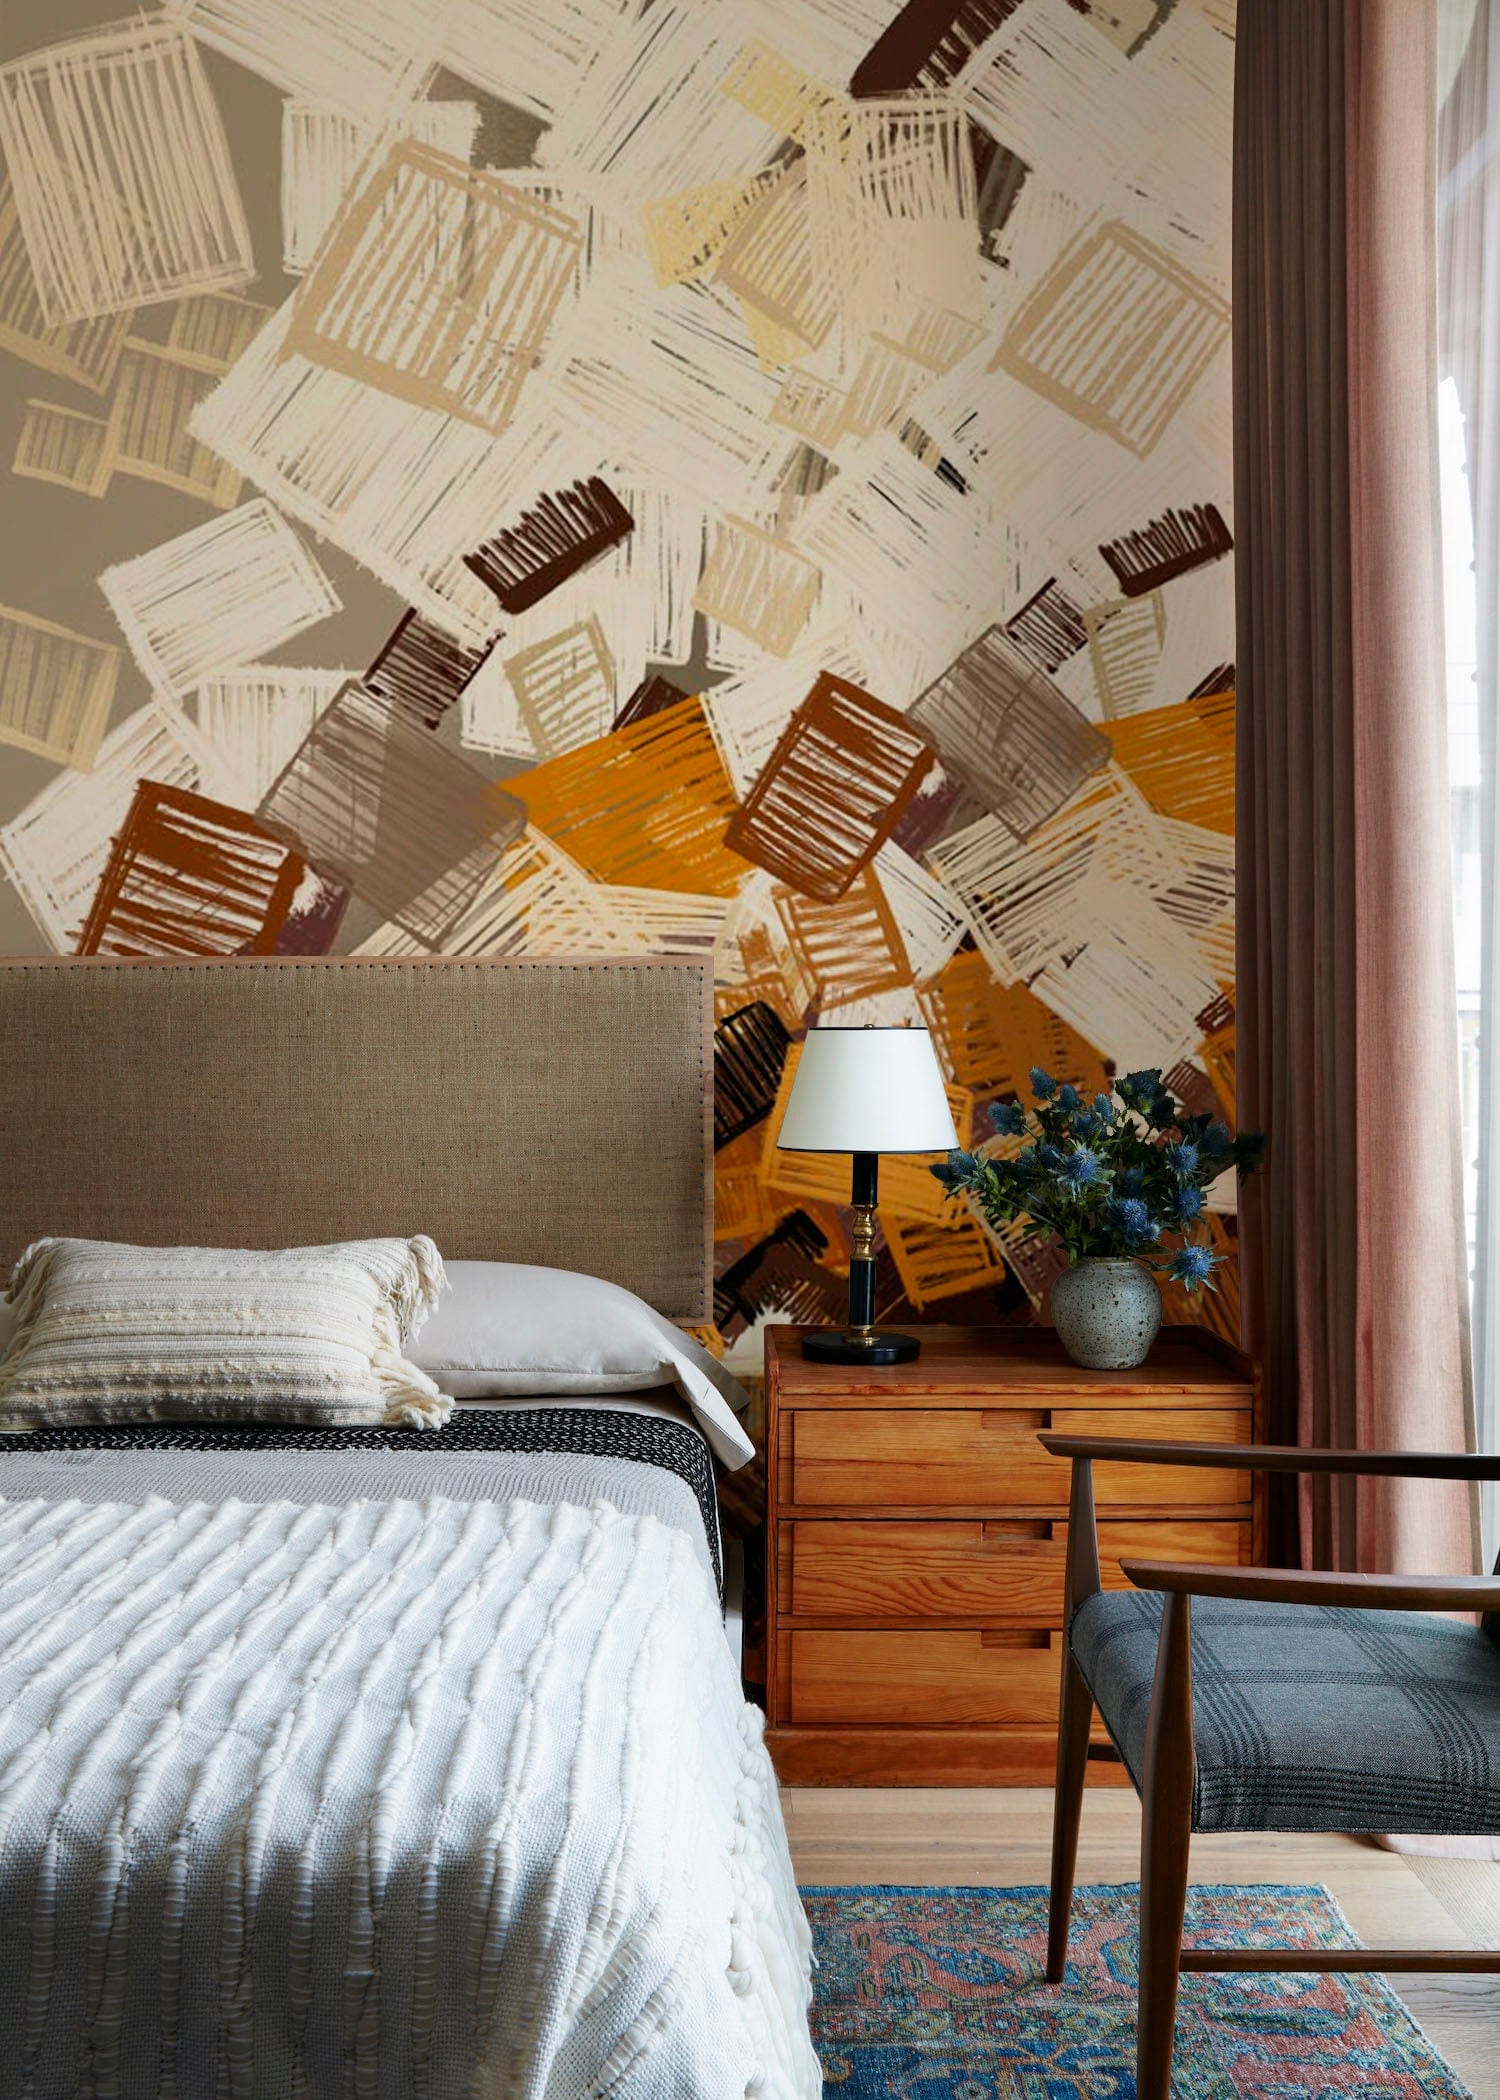 Bedroom Covered in an Abstract Mesh Blocks Wallpaper Mural